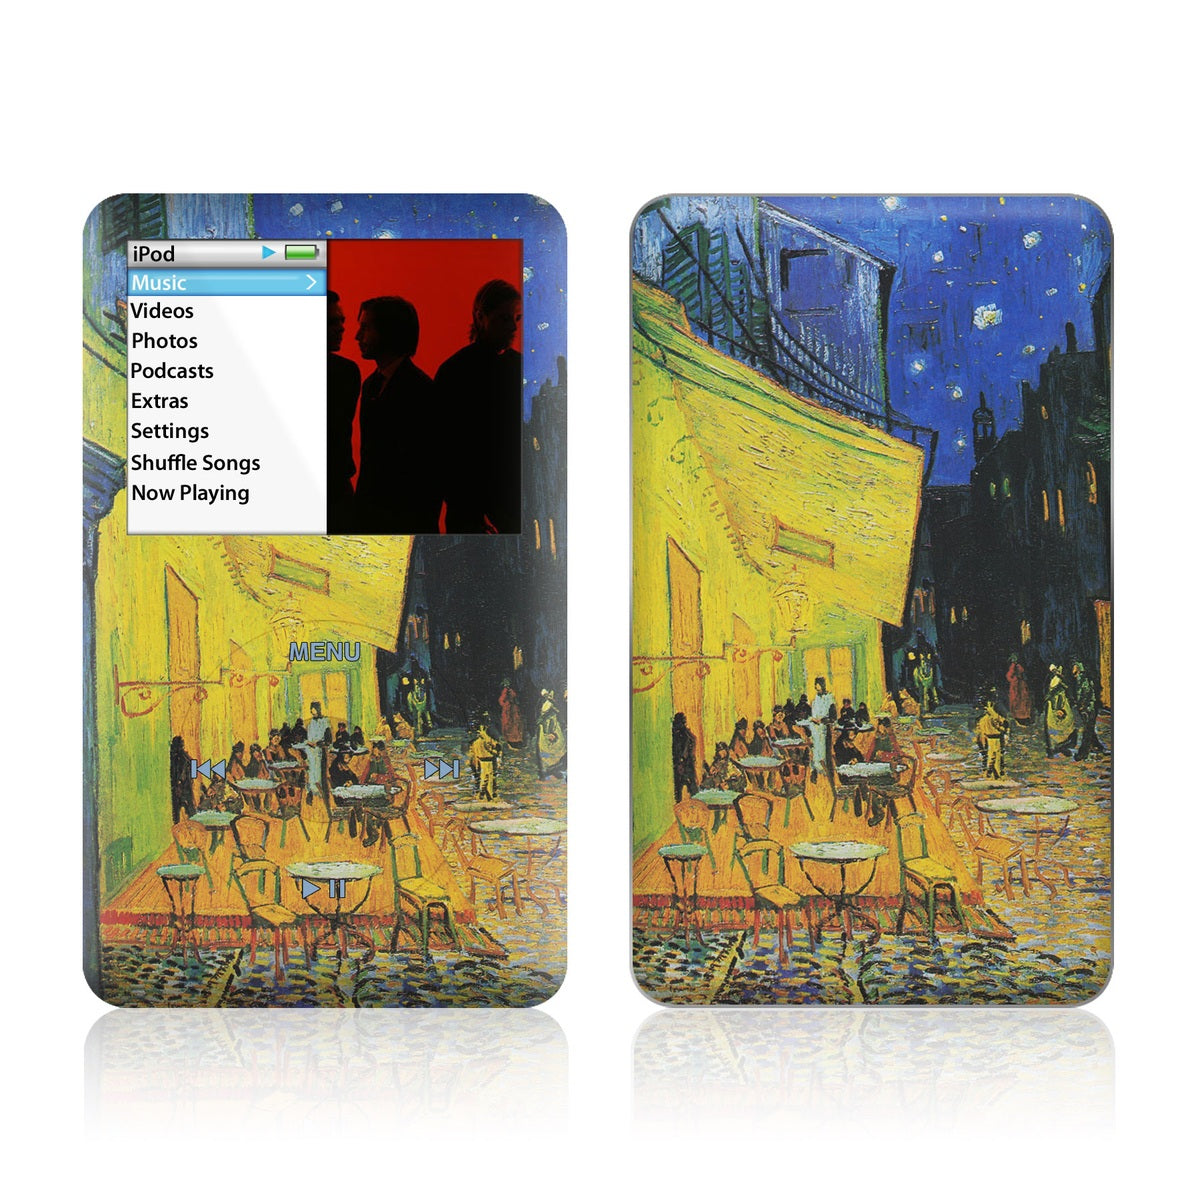 Cafe Terrace At Night - iPod Classic Skin